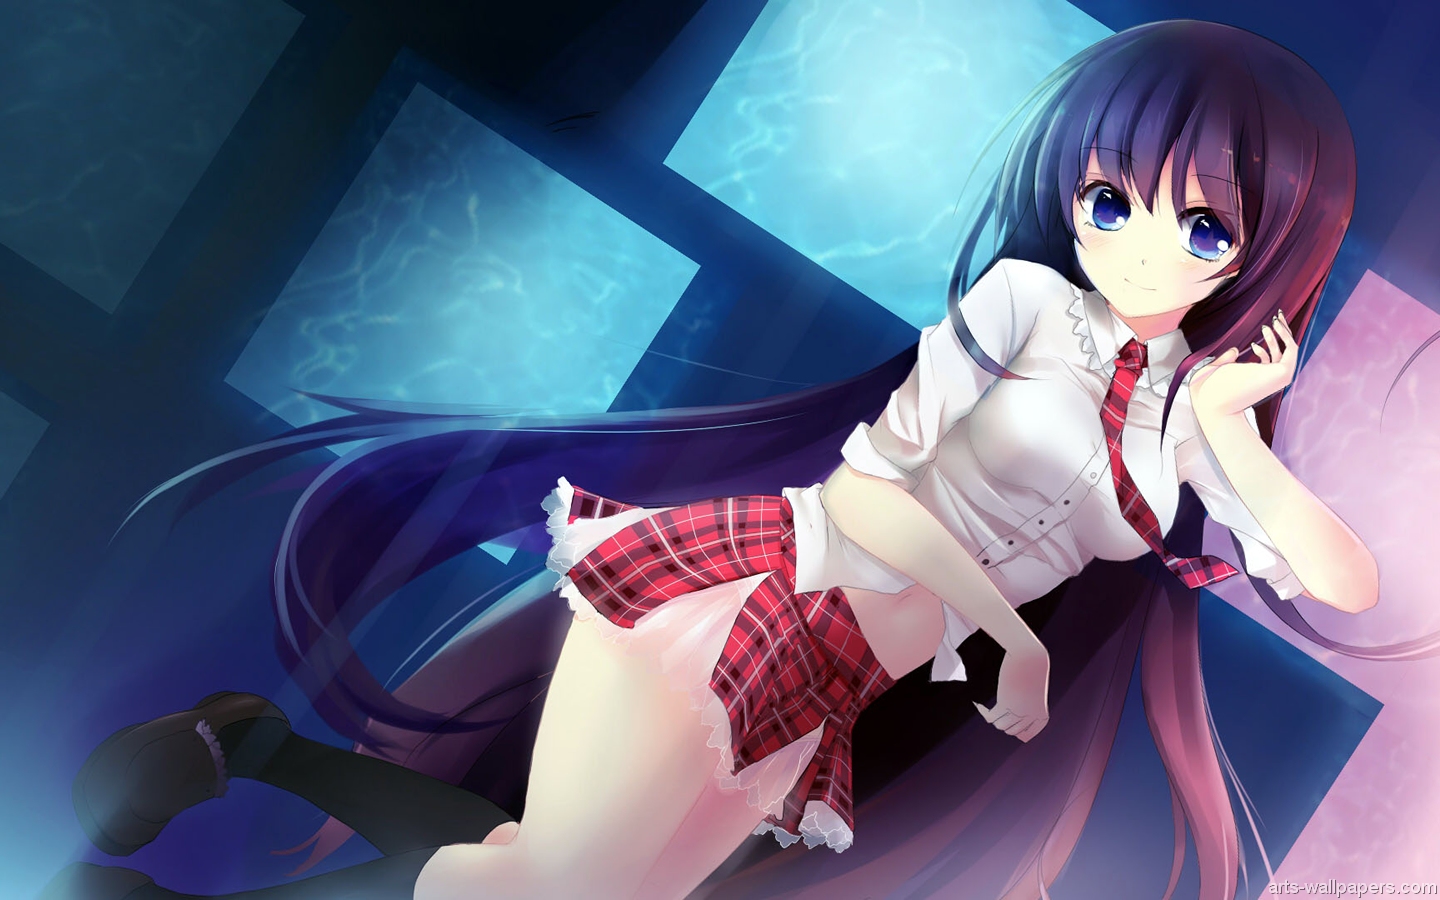 Anime Wallpapers Japanese Anime Widescreen Full HD CG Wallpapers